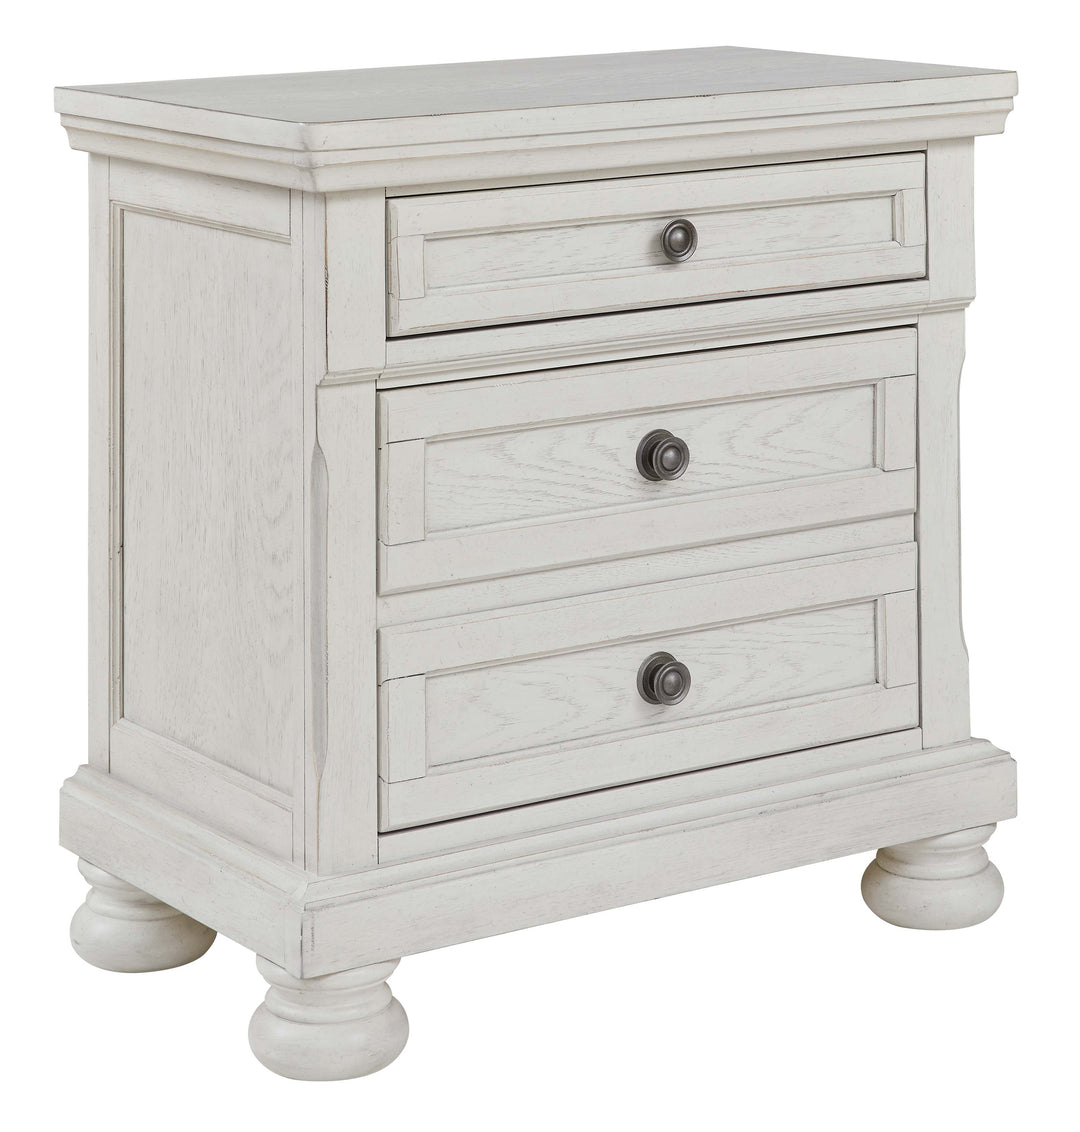 Ashley B742-92 - Robbinsdale - Antique White - Two Drawer Night Stand